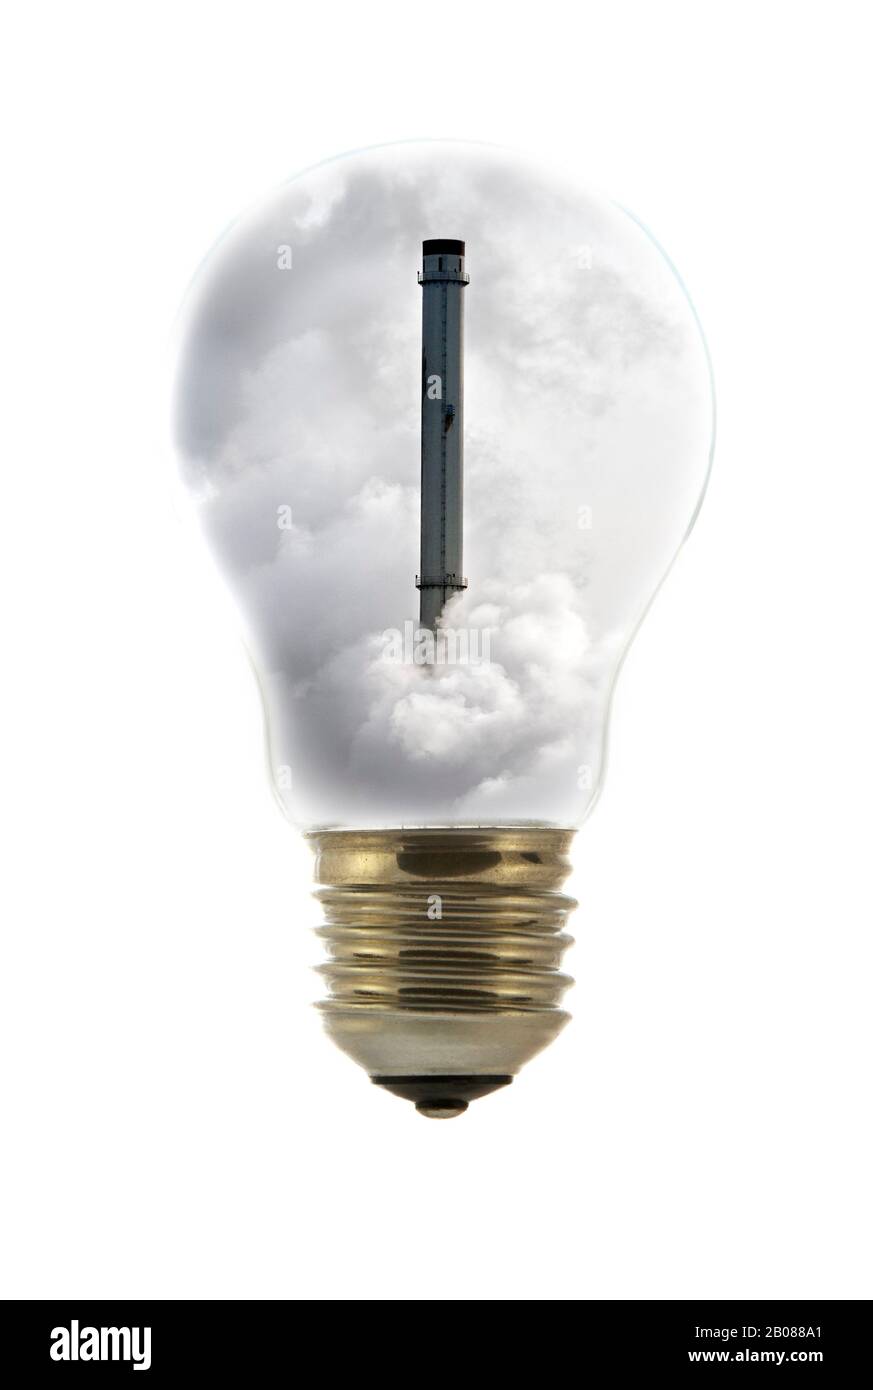 Chimney covered in smoke inside incandescent lamp / bulb against white background Stock Photo